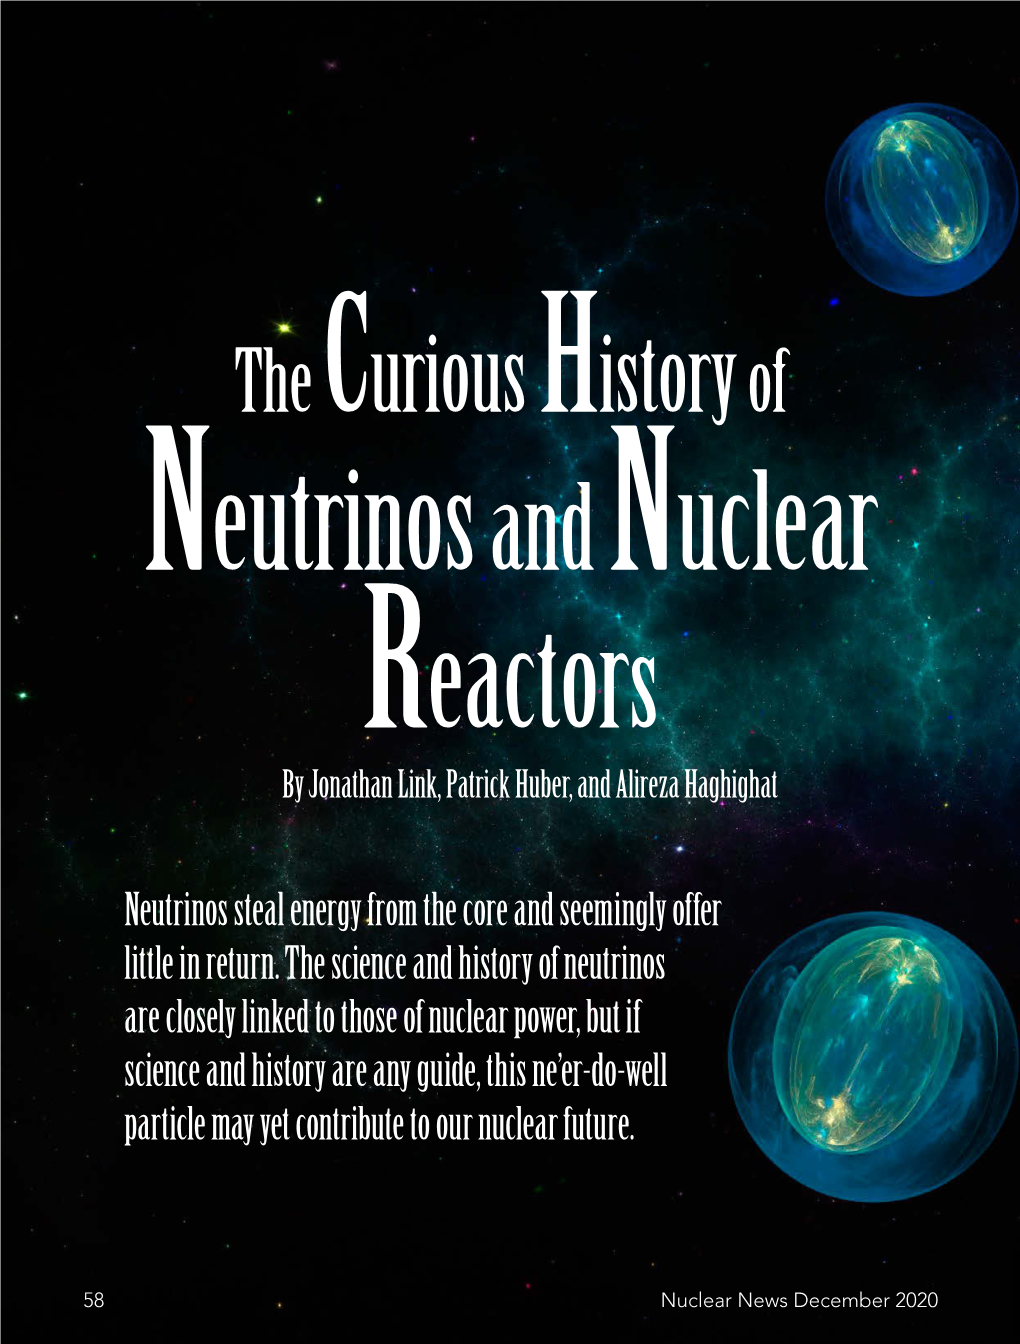 The Curious History of Neutrinos and Nuclear Reactors by Jonathan Link, Patrick Huber, and Alireza Haghighat